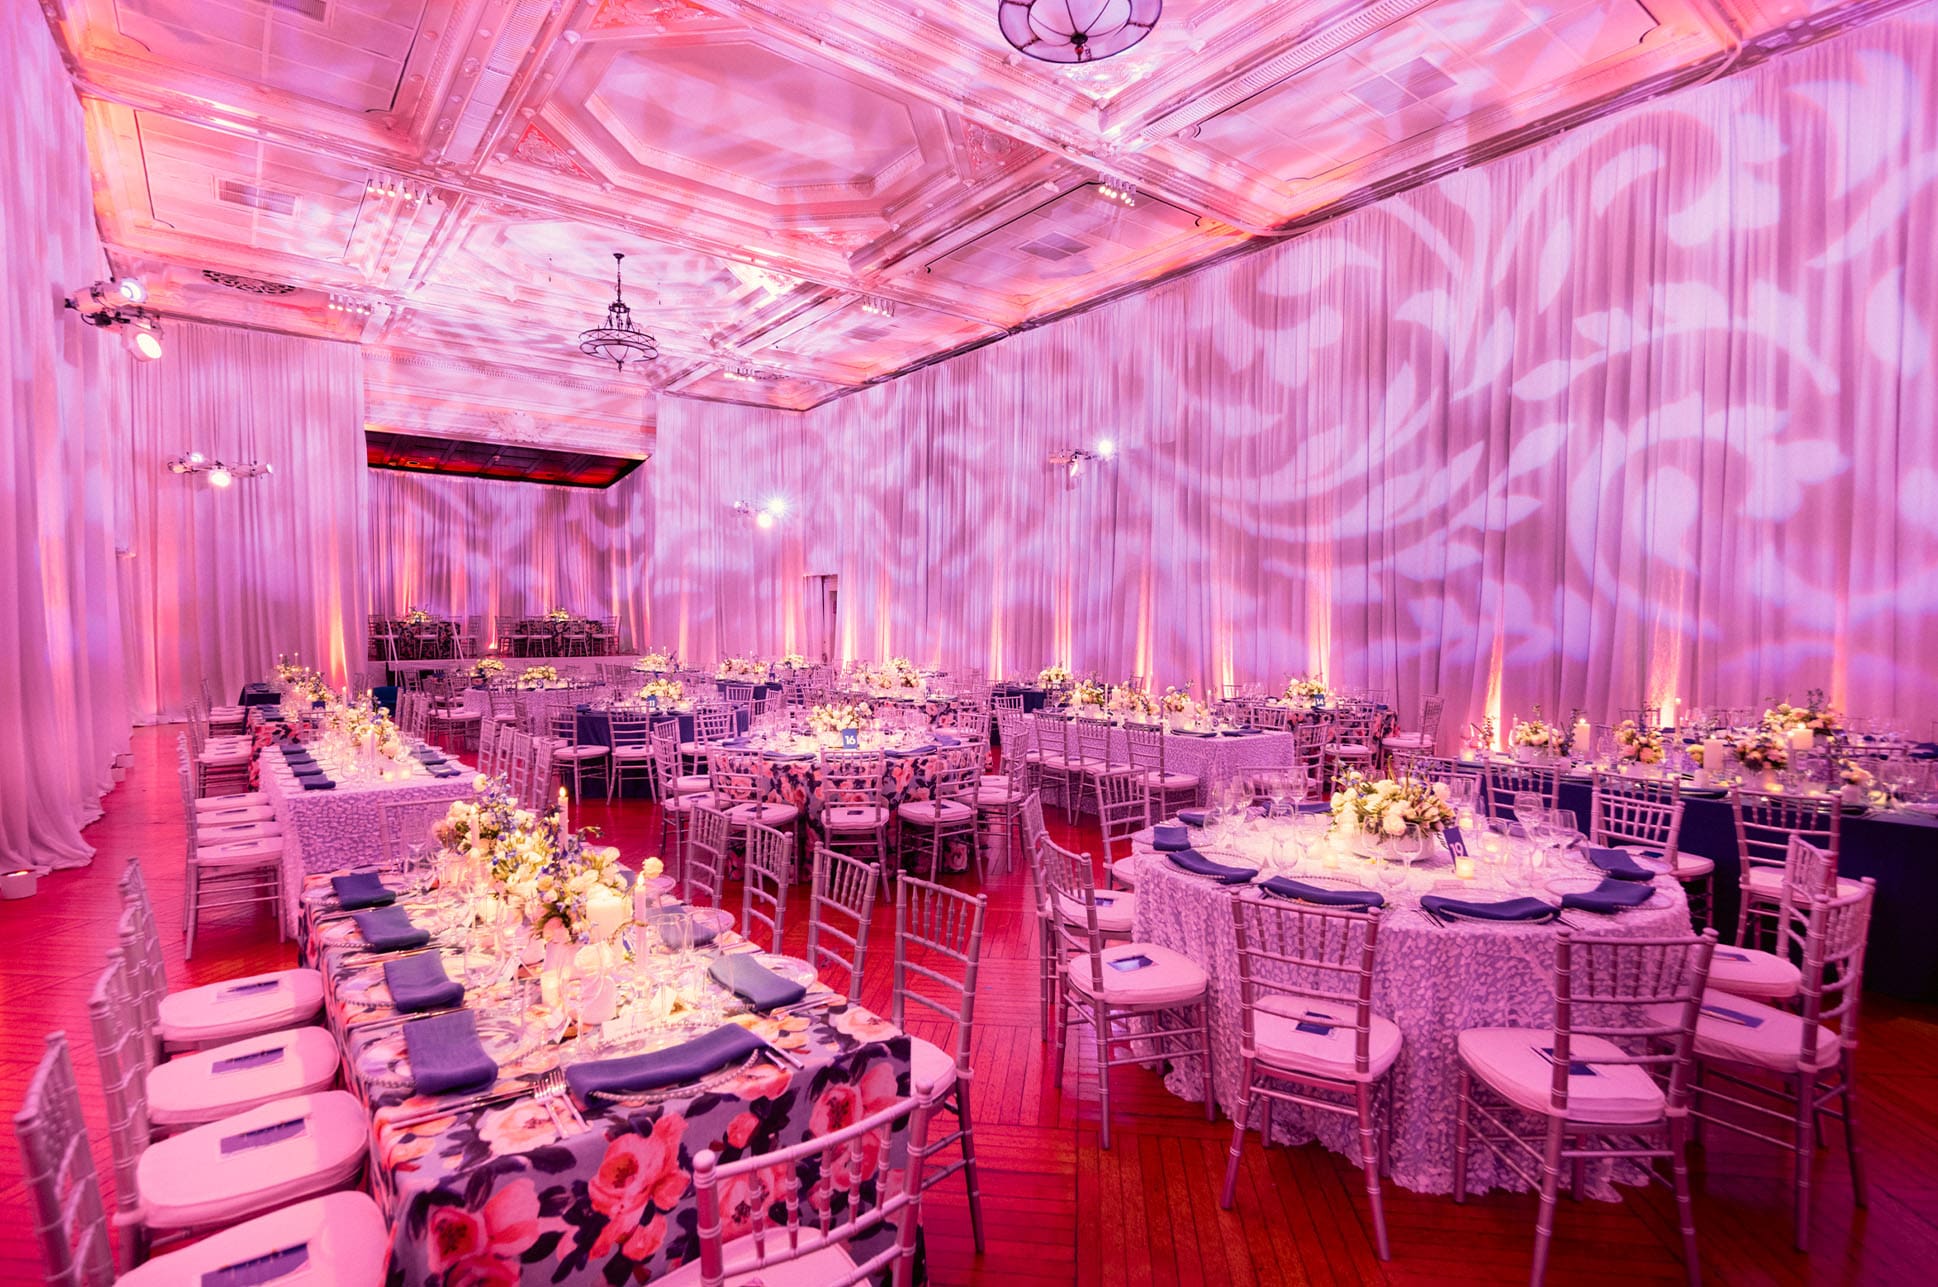 Tables and chairs set up in a festively lit room.